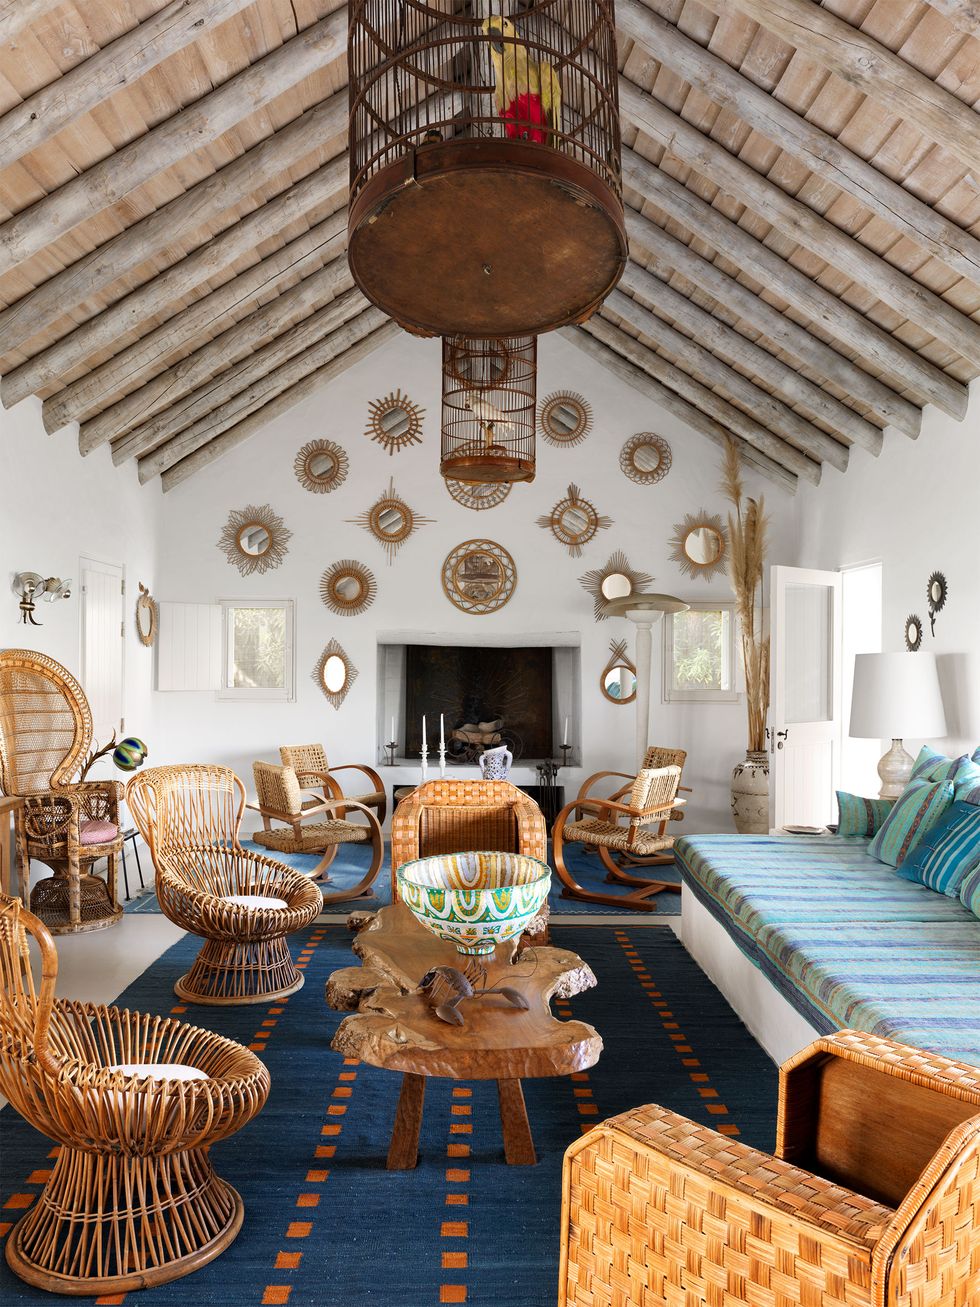 living room with birdcages hanging from a slanted beamed ceiling, fireplace on far wall with several straw mirrors, rattan chairs, rustic wooden cocktail table, striped aqua fabric sofa, navy rug with small red squares